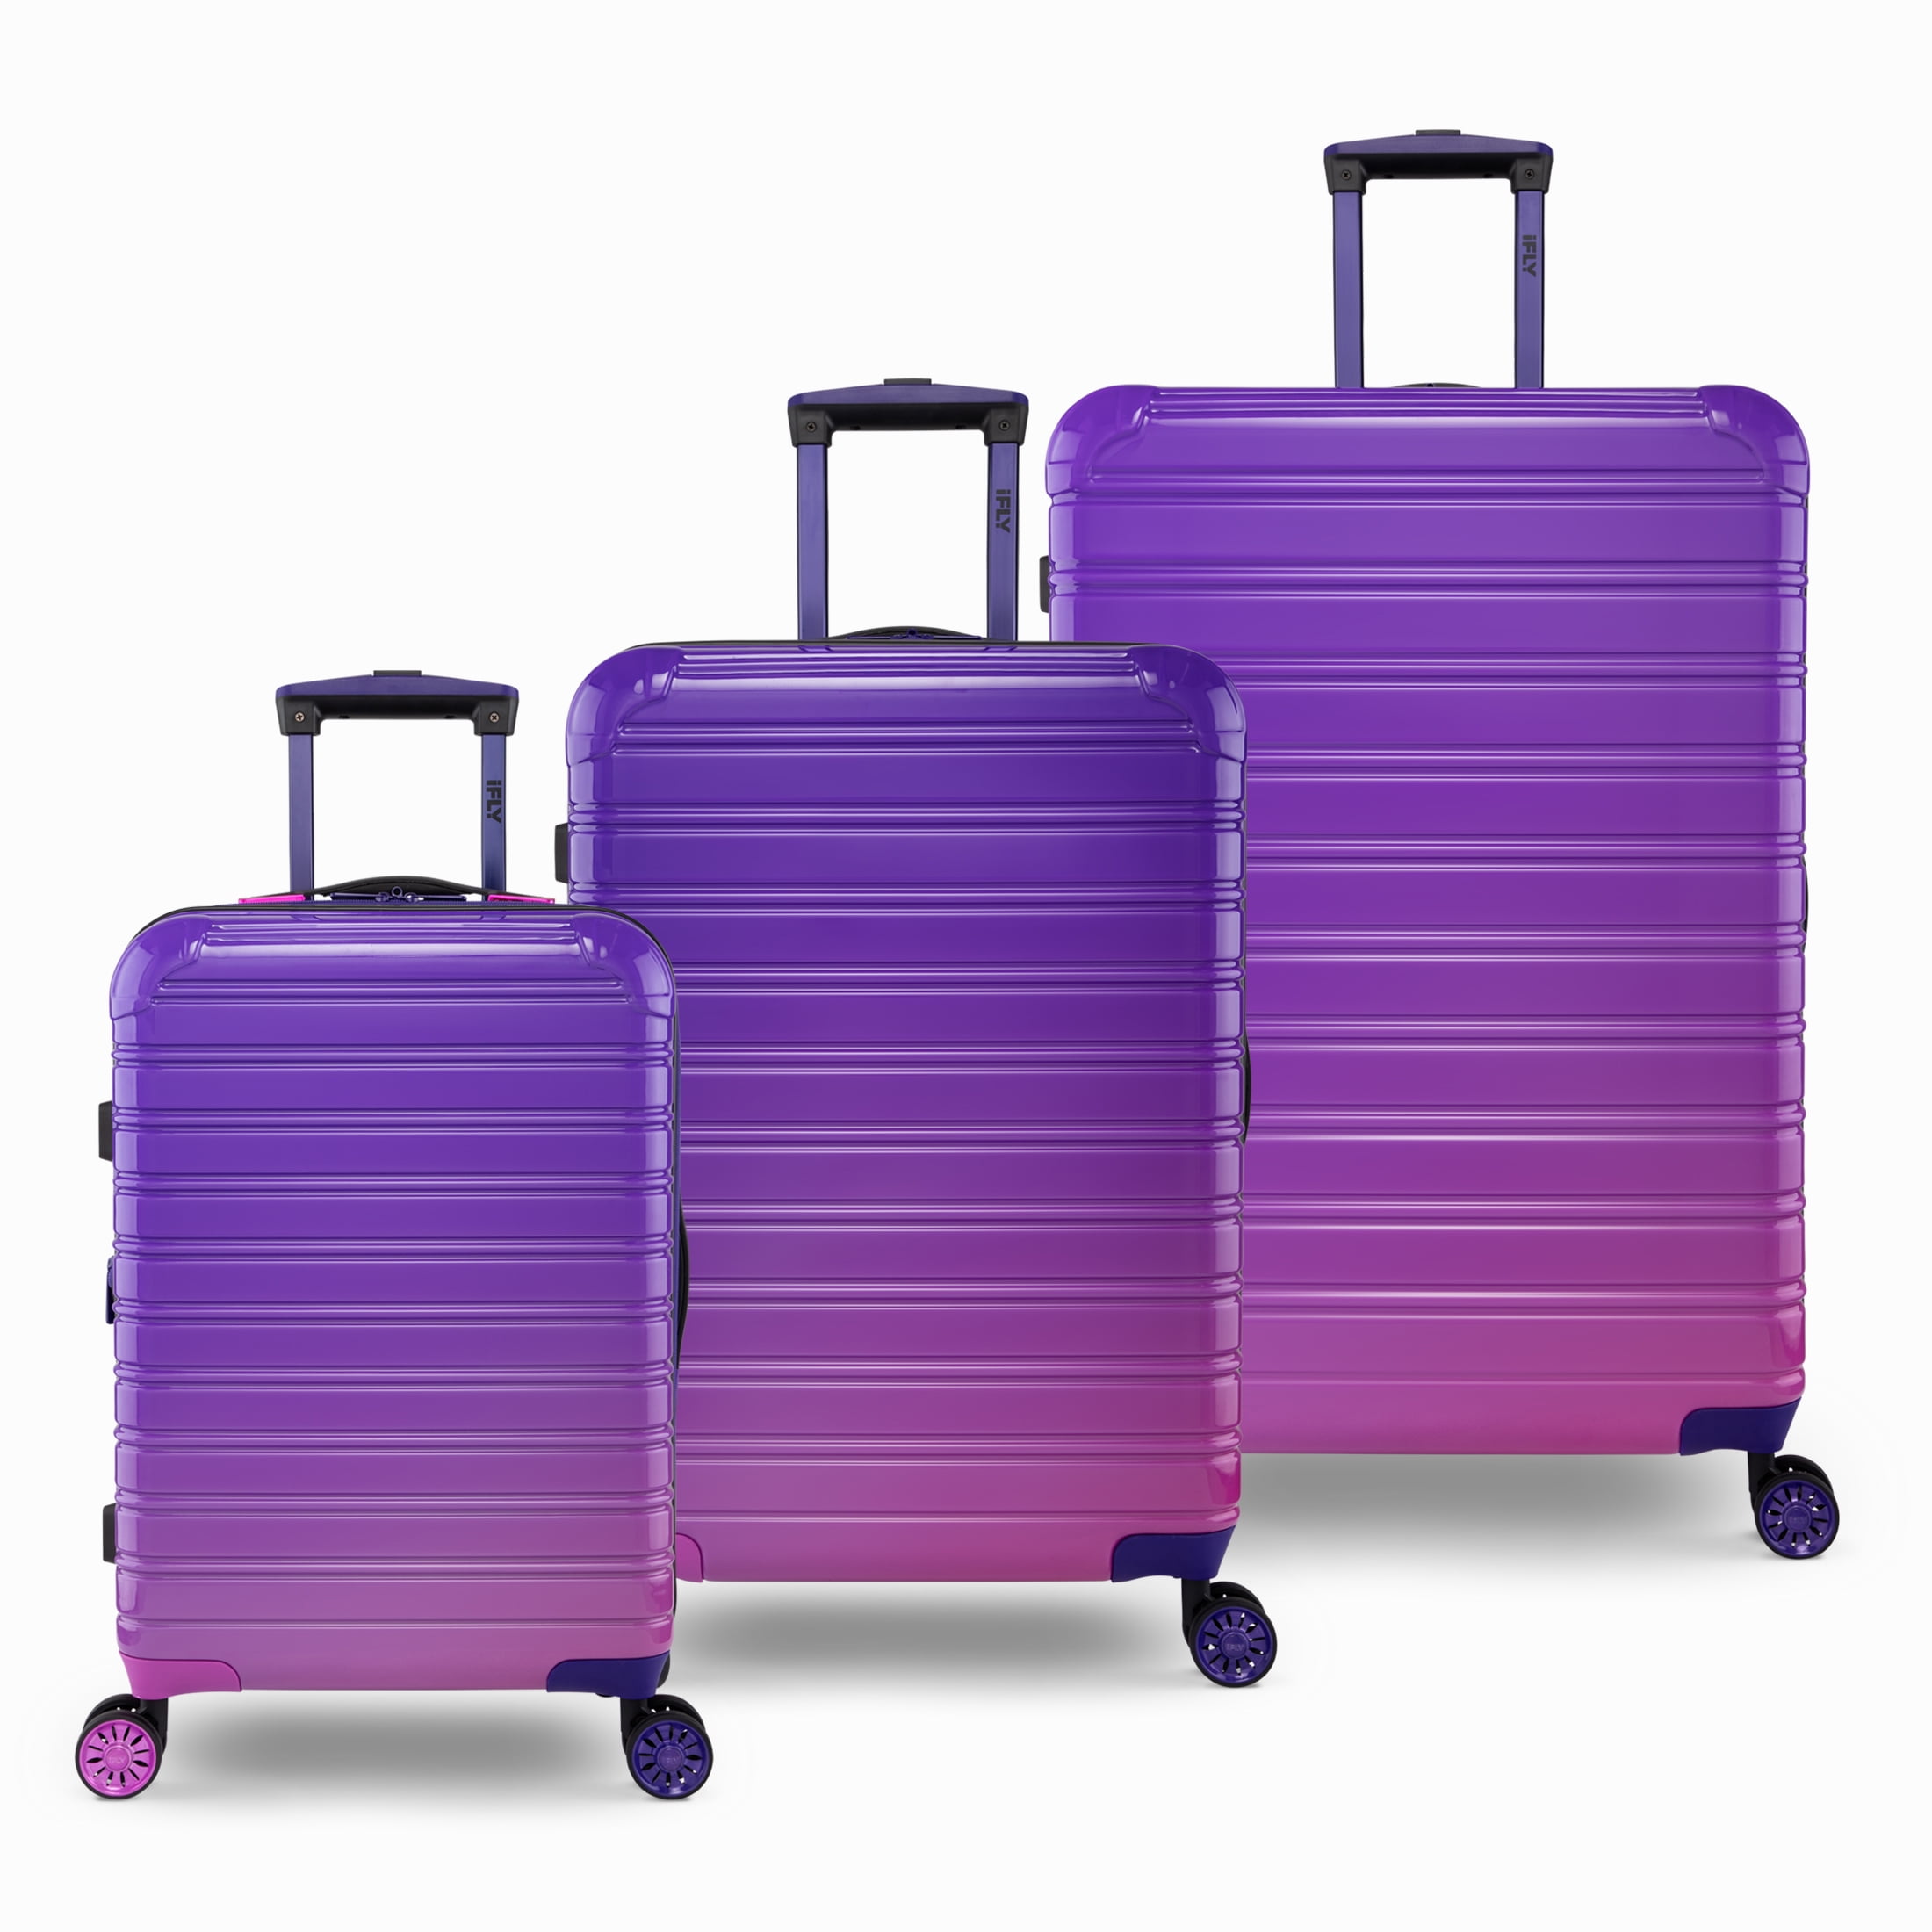 iFLY Hardside Luggage Fibertech 3 Piece Set with Double Spinner Wheels ...